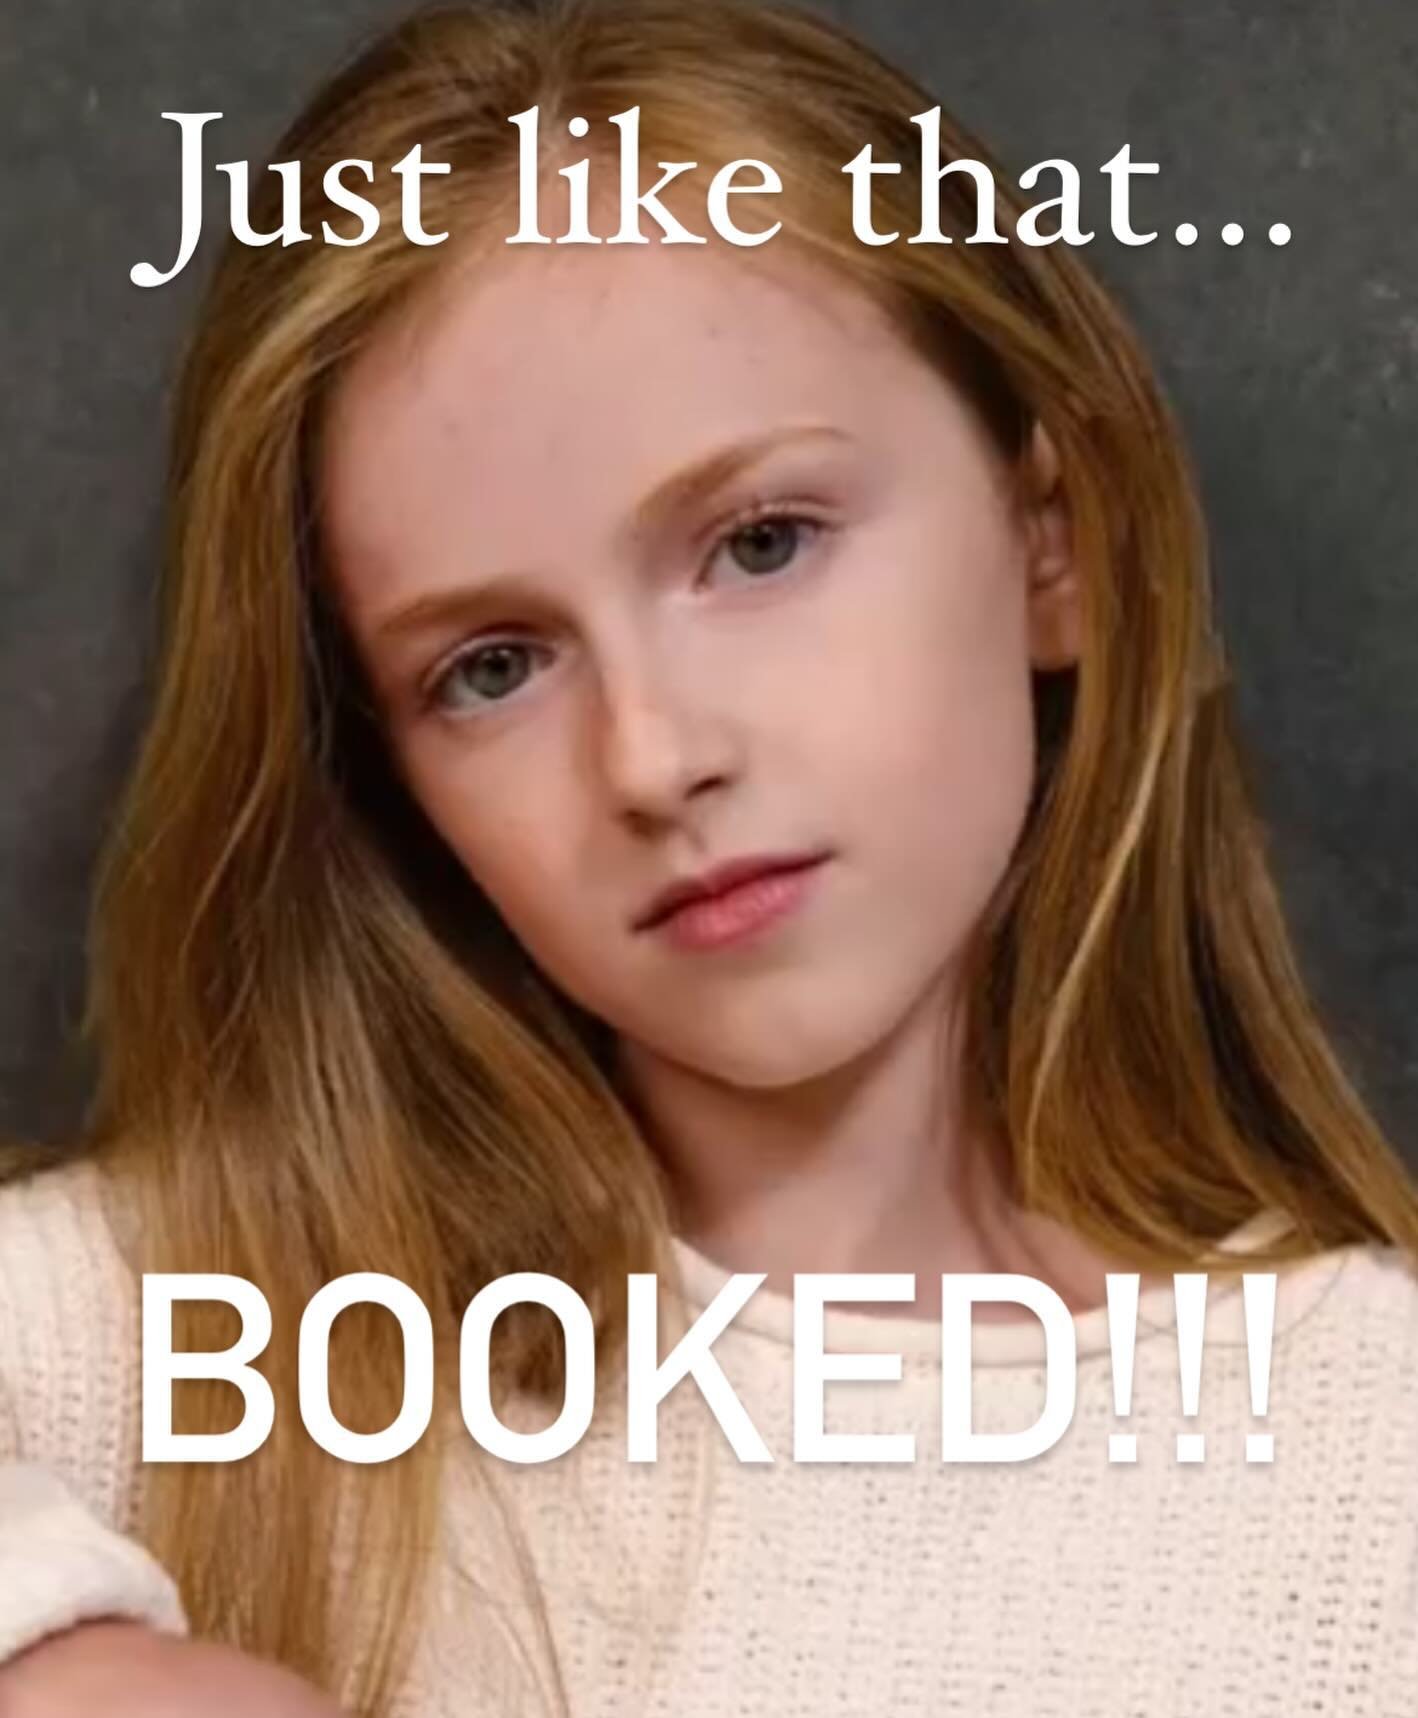 A huge congratulations to @mollyglowsings for her feature film booking. Sending so much love your way. Have a blast!

#bookedbookers #bookedfamily #bookedbymichelle #coachmichelle